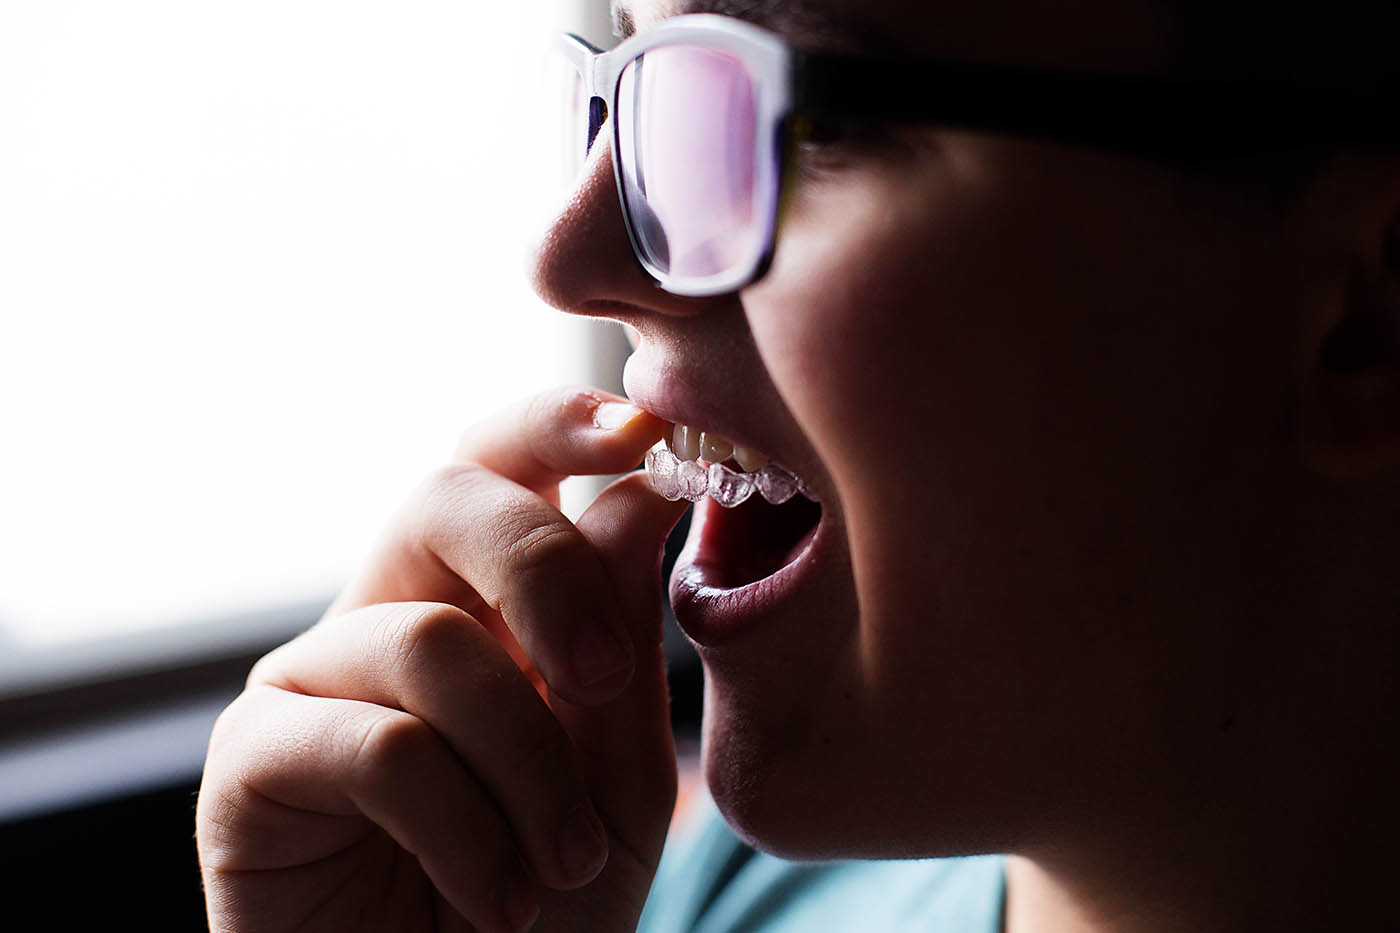 How fast does Invisalign® work? A personal experience from the lifestyle blogger at allfortheboys.com